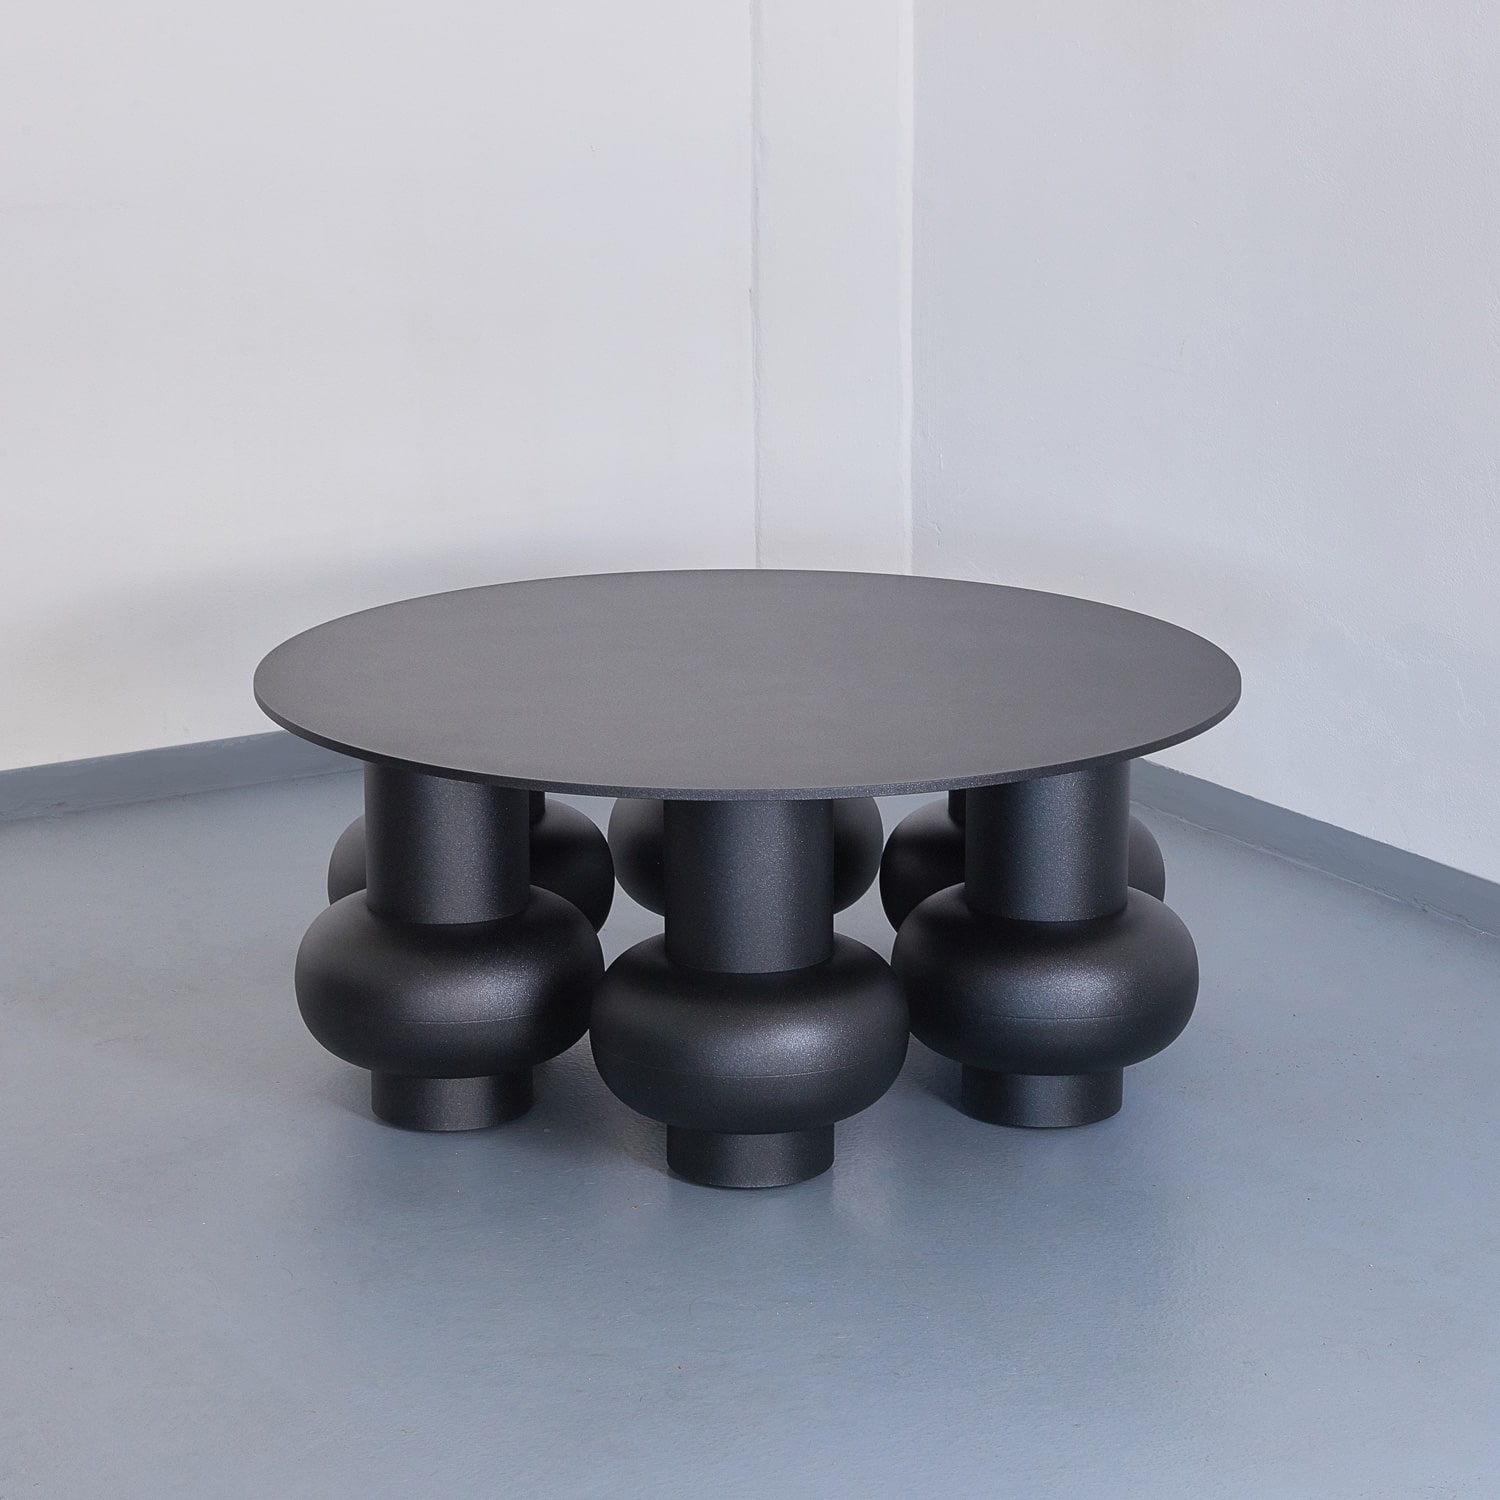 Odyssey Sculptural Low Table Solitary